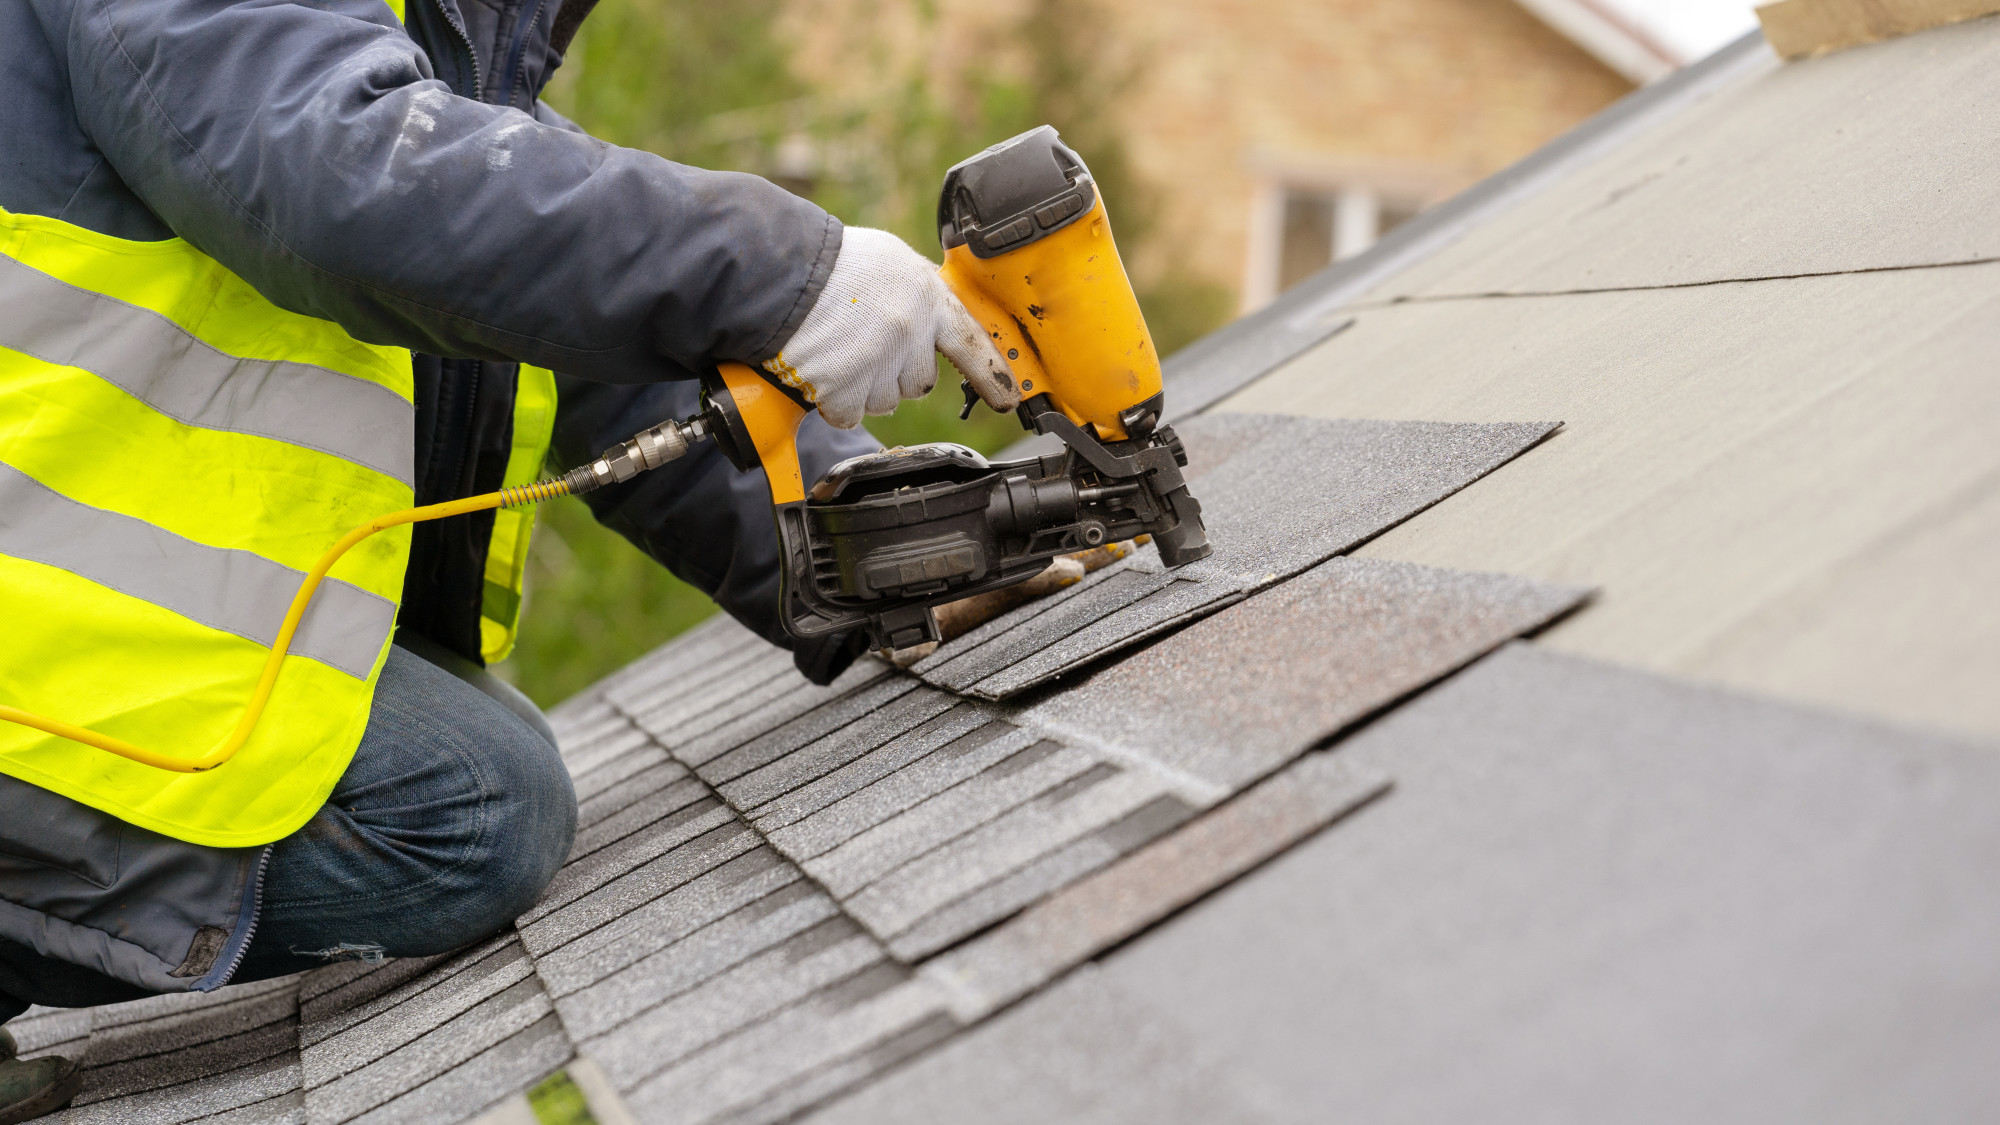 Installing a new roof for your home properly requires knowing what not to do. Here are residential roof installation errors and how to avoid them.